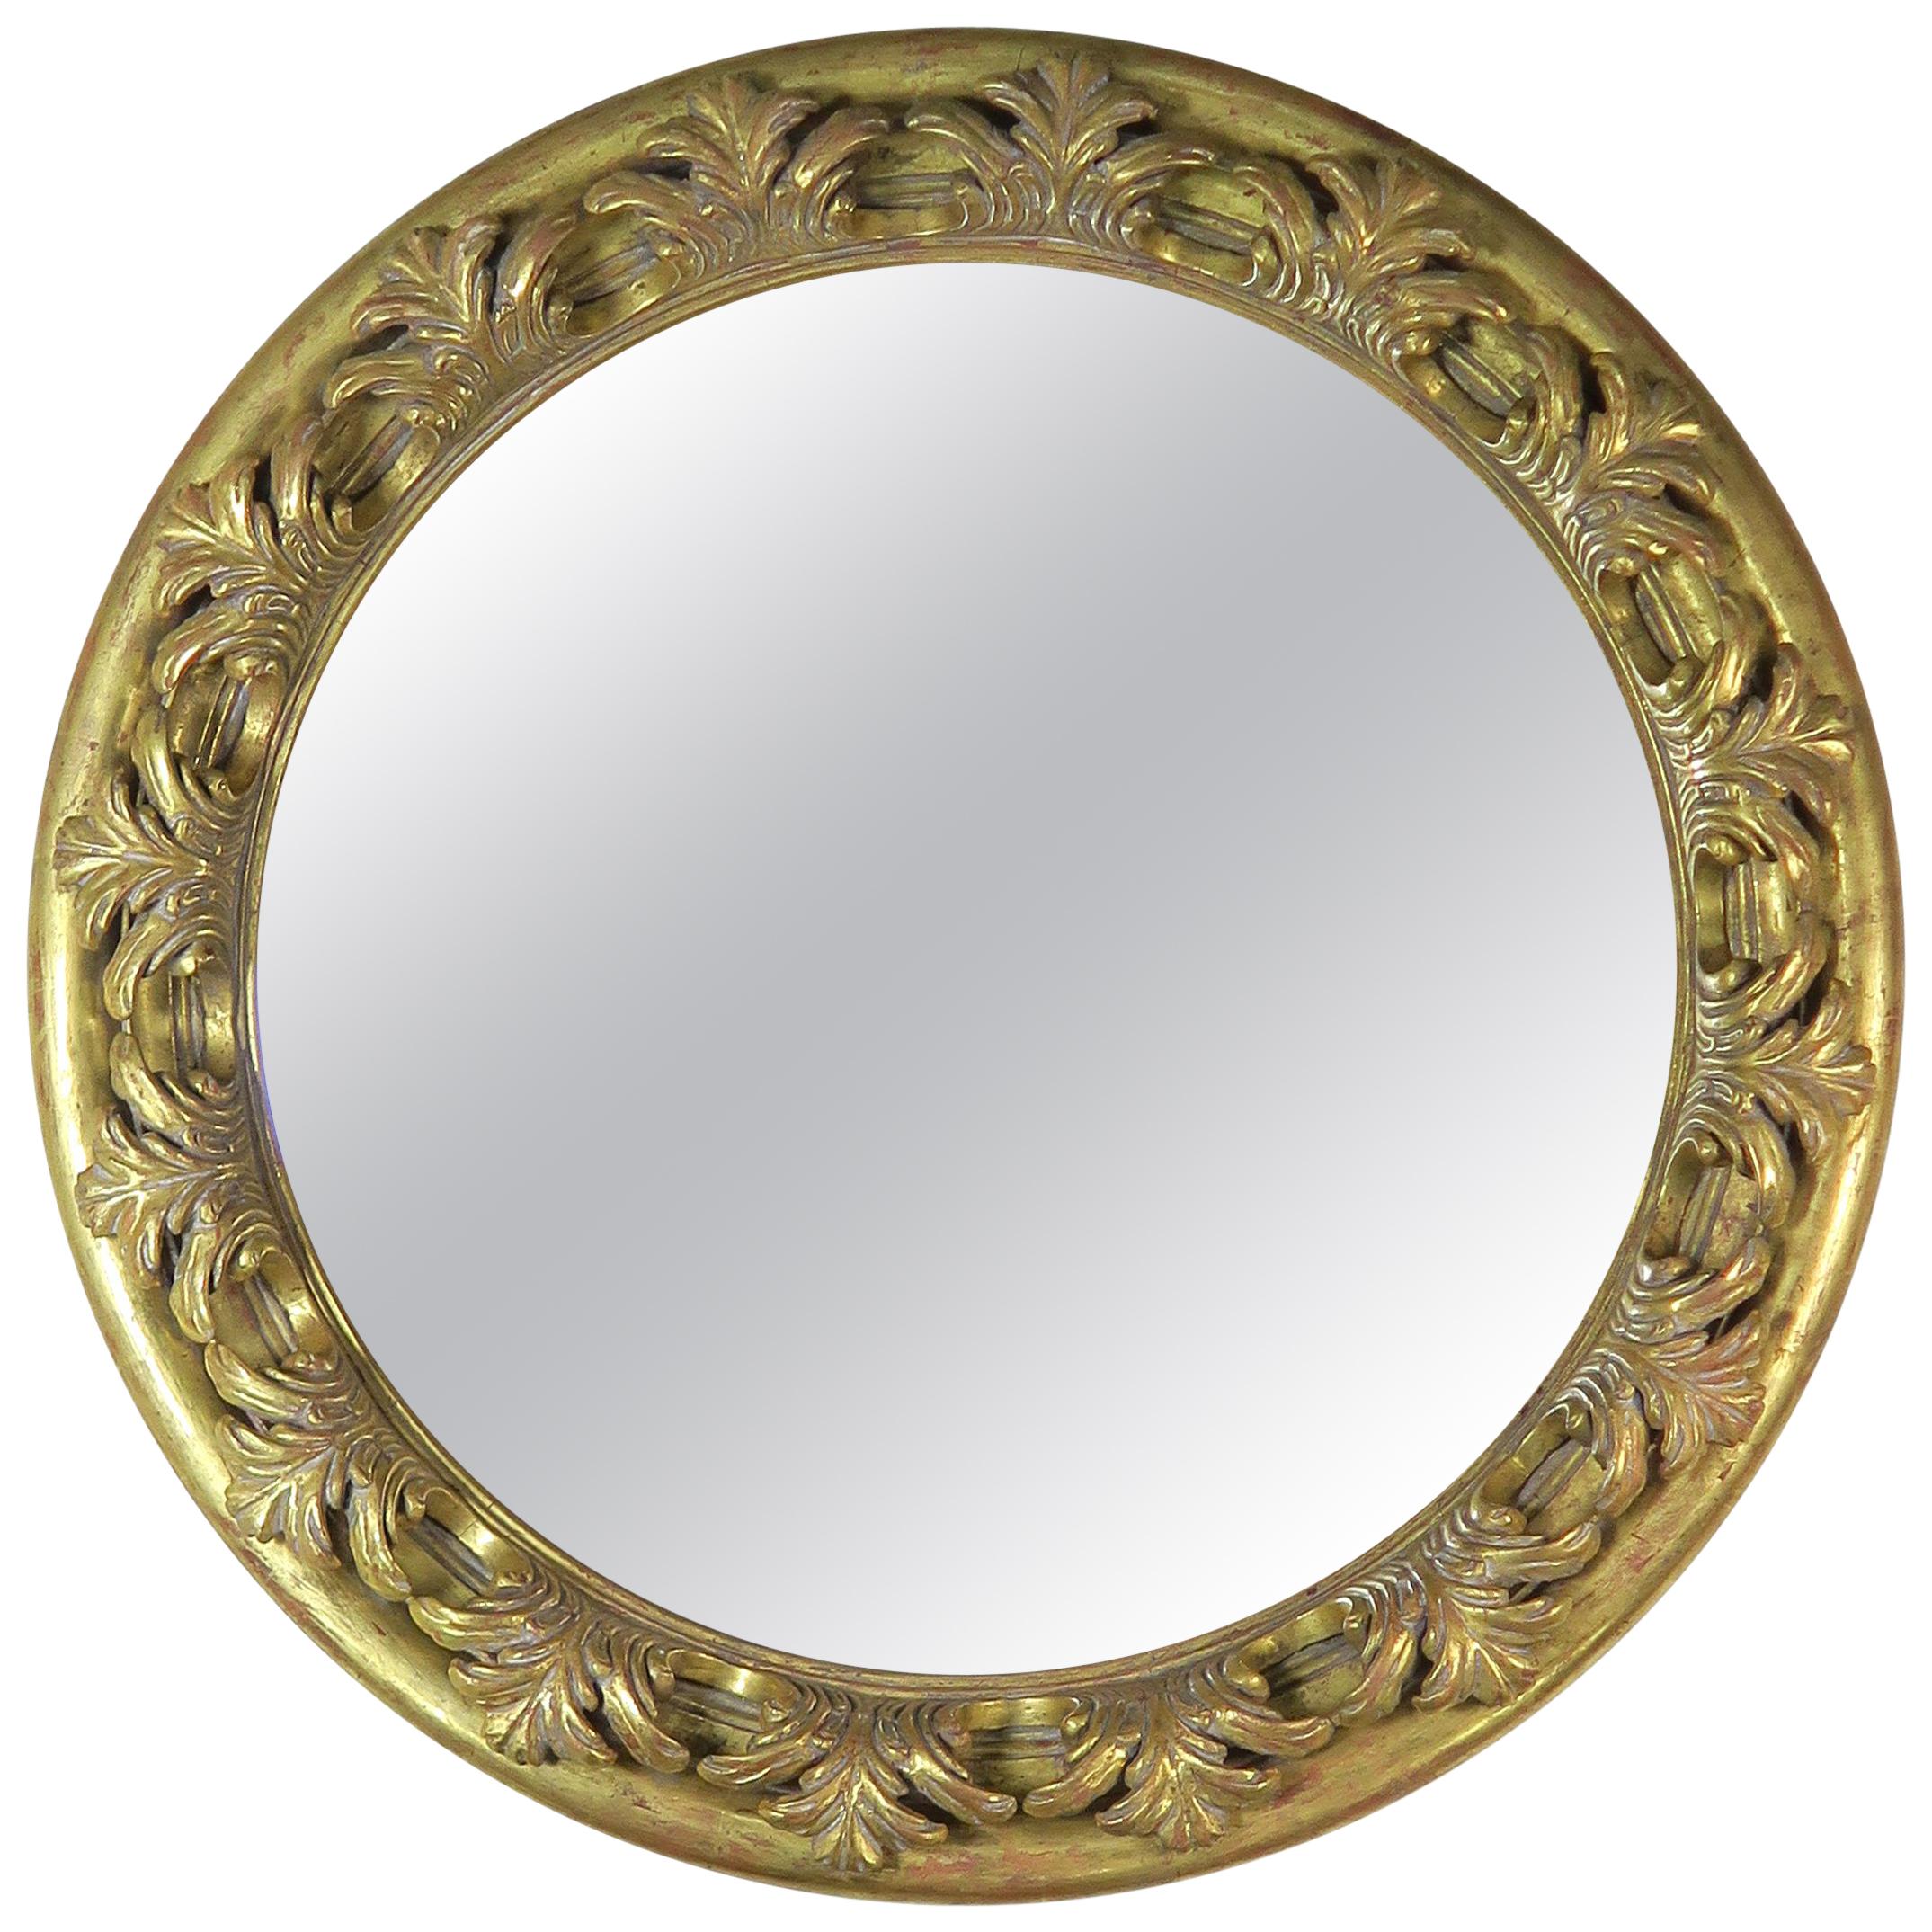 Spanish Carved Giltwood Round Shaped Mirror